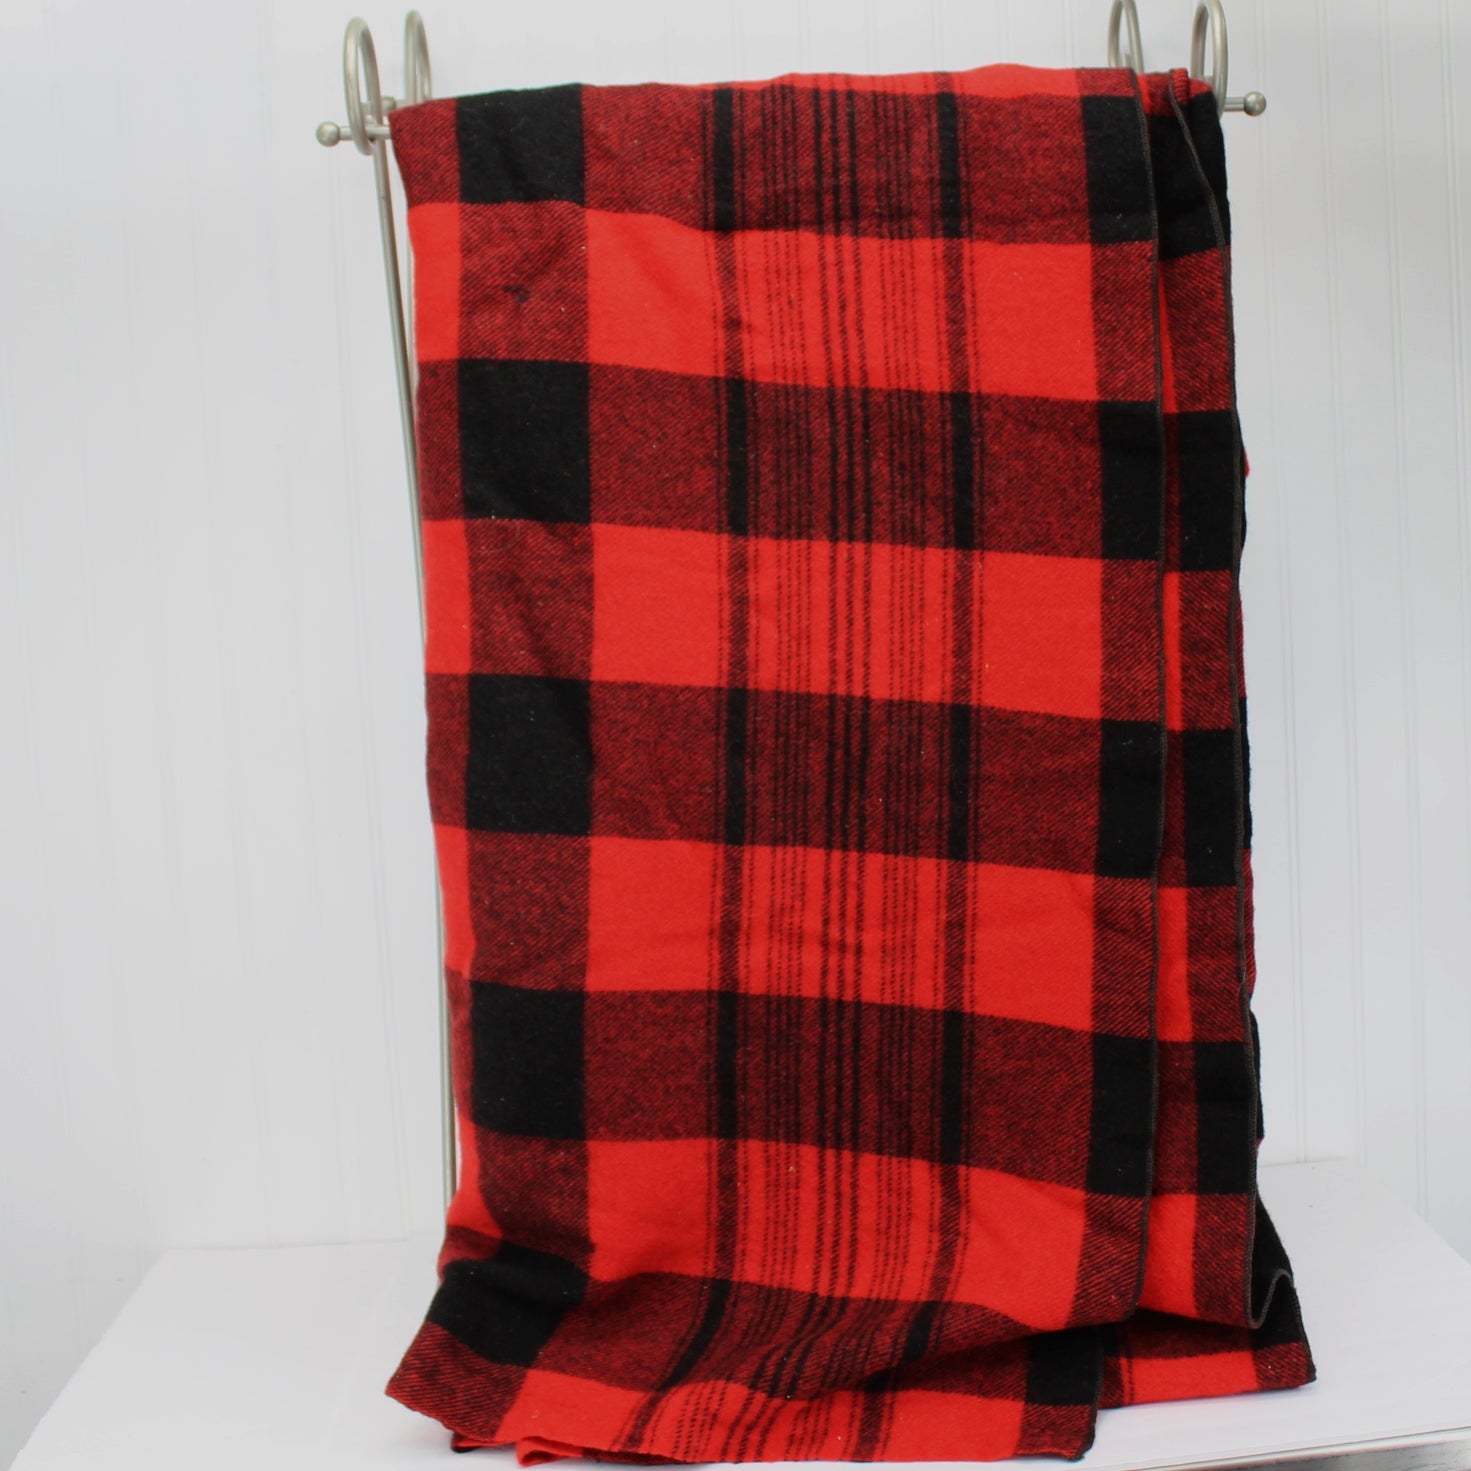 Double Length Wool Blanket Cabin Camp Red Black Check 67" X 154" pattern with checks and lines